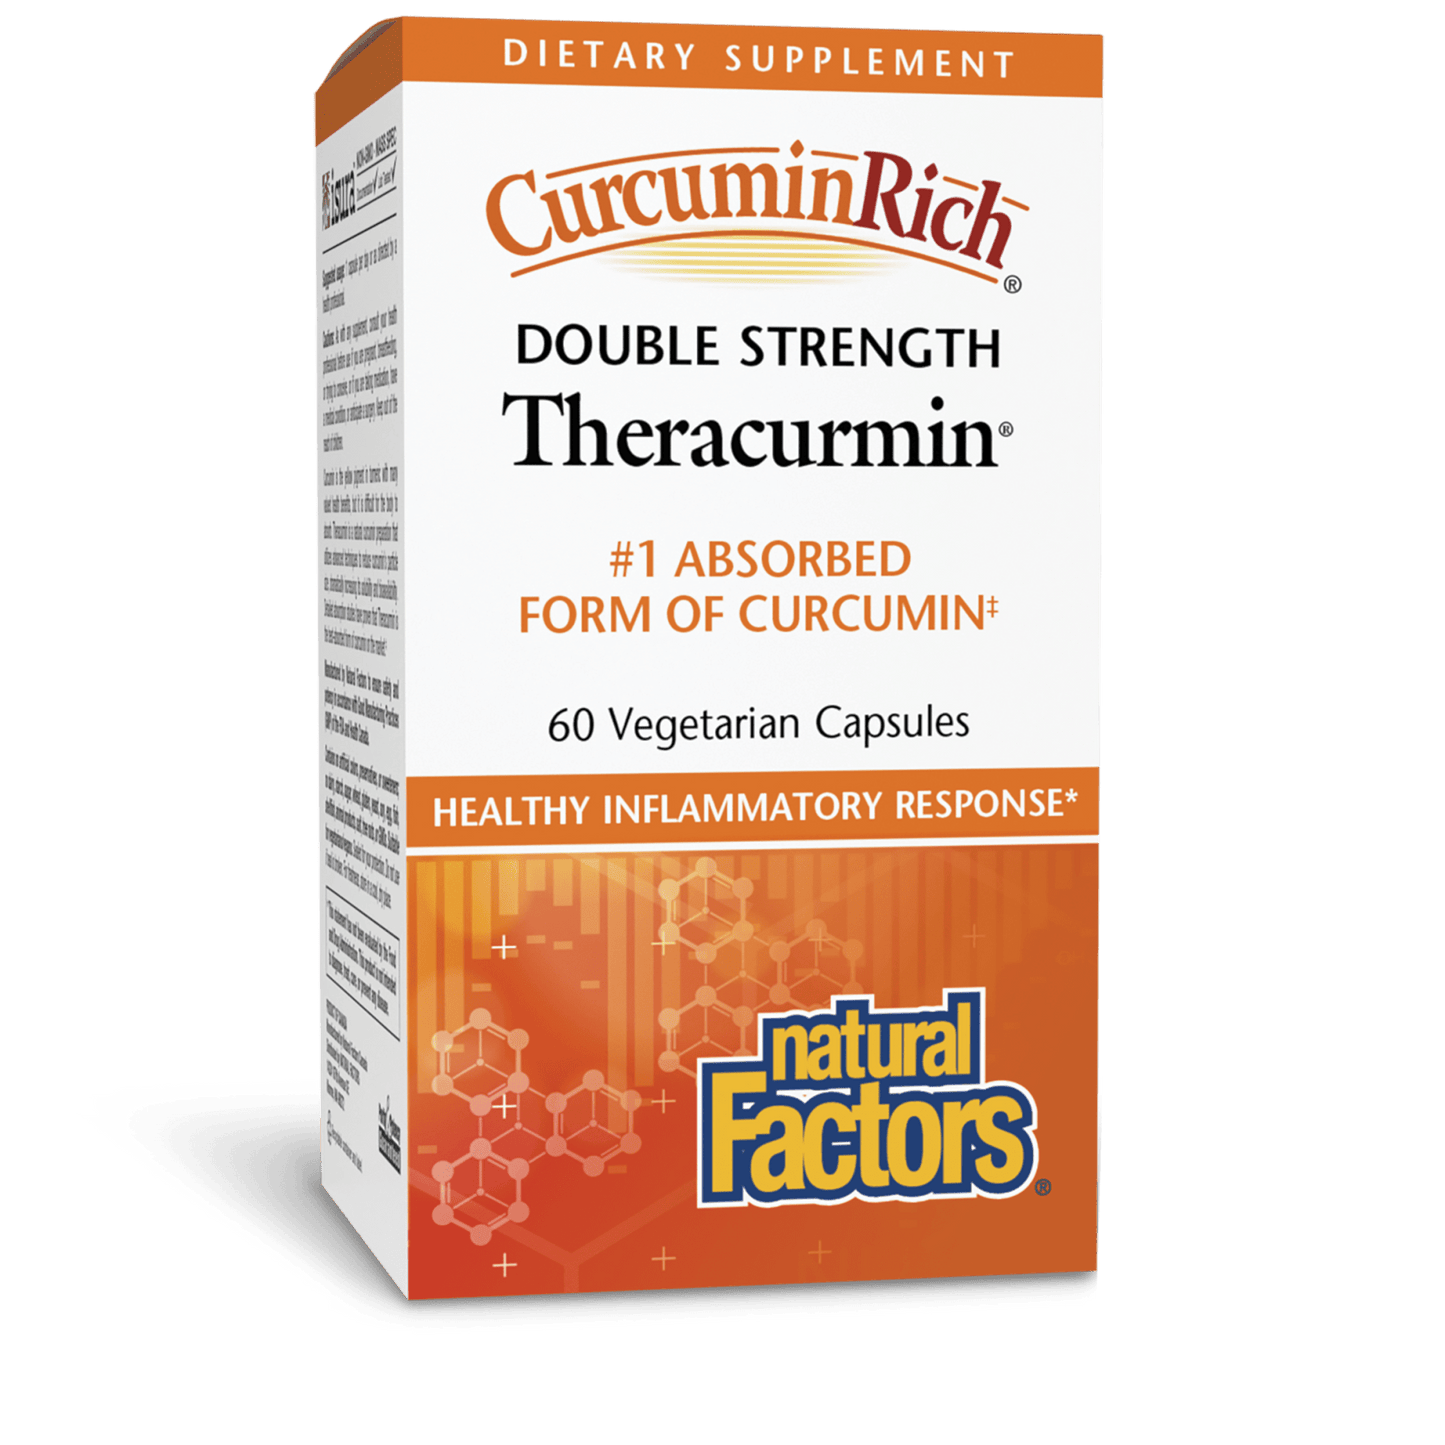 Double Strength Theracurmin|variant|hi-res|4544U